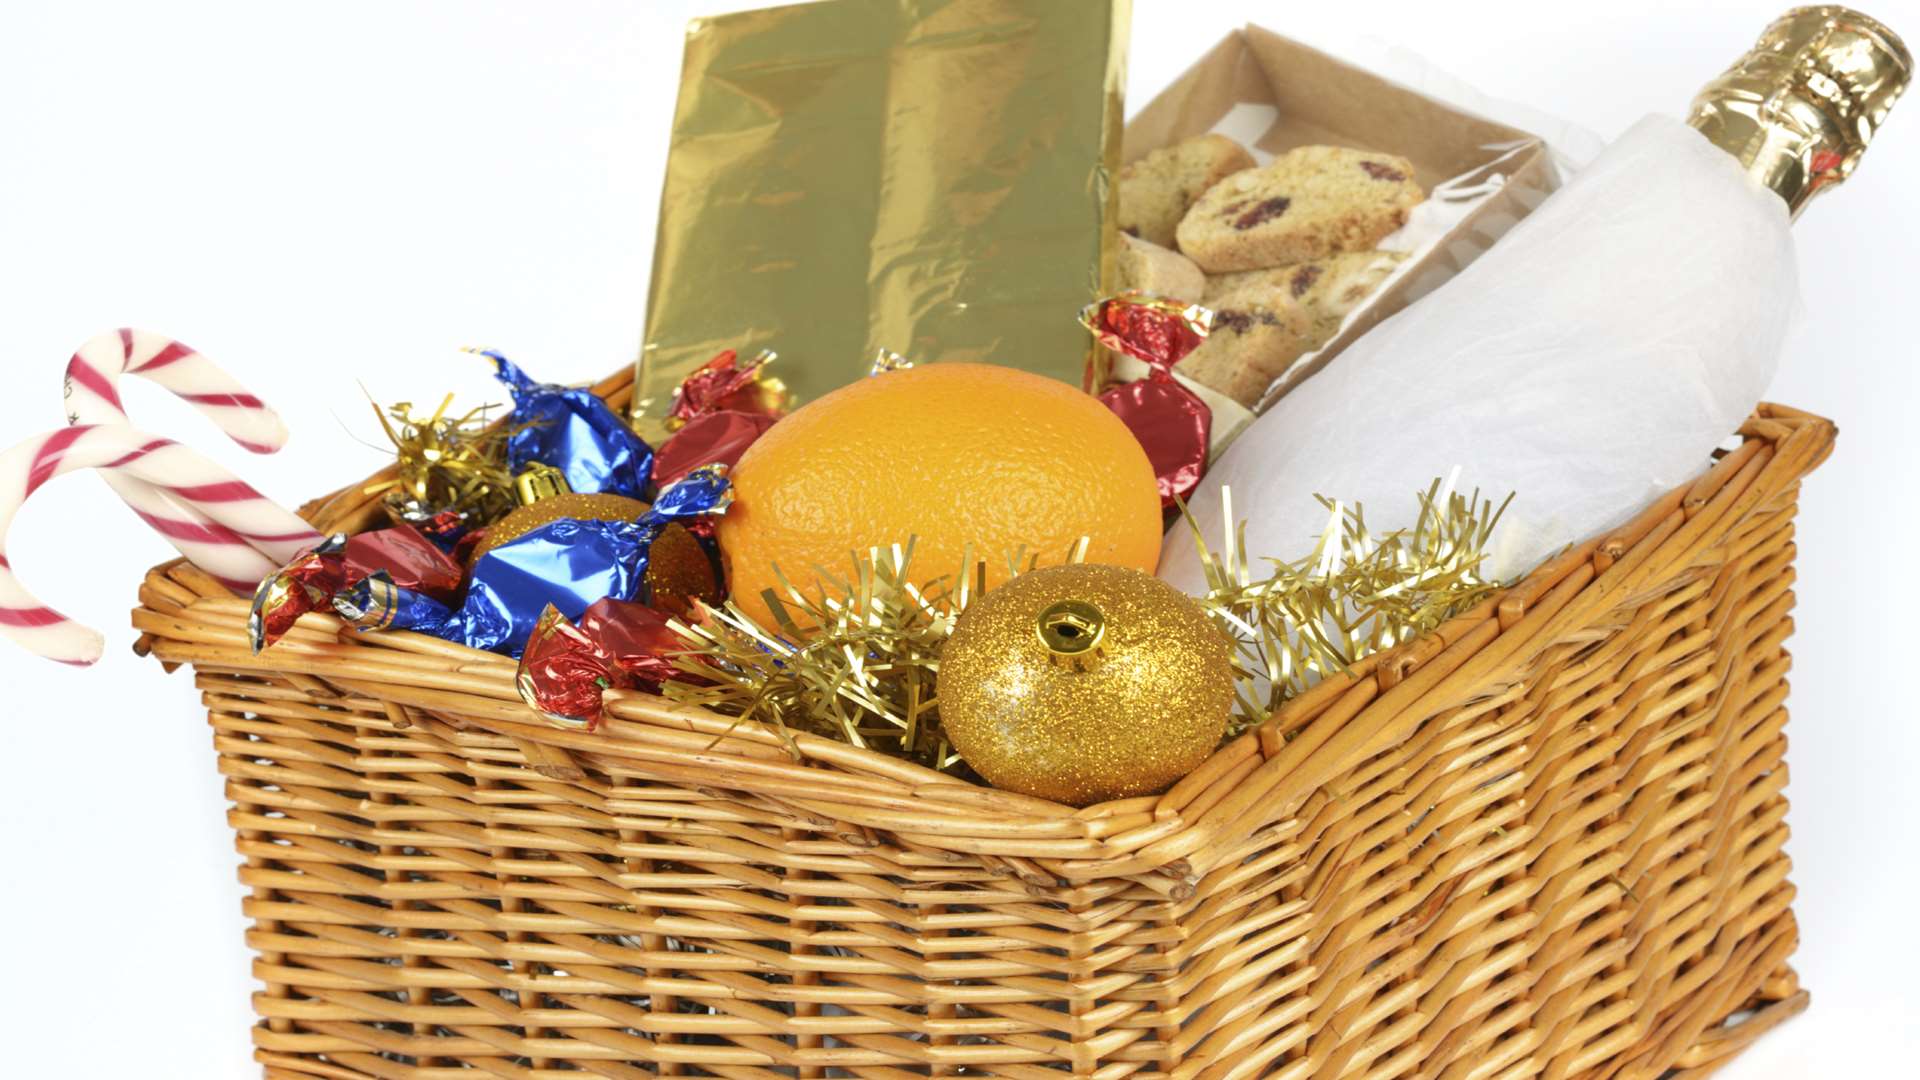 Shoppers could win a Christmas hamper. File picture.